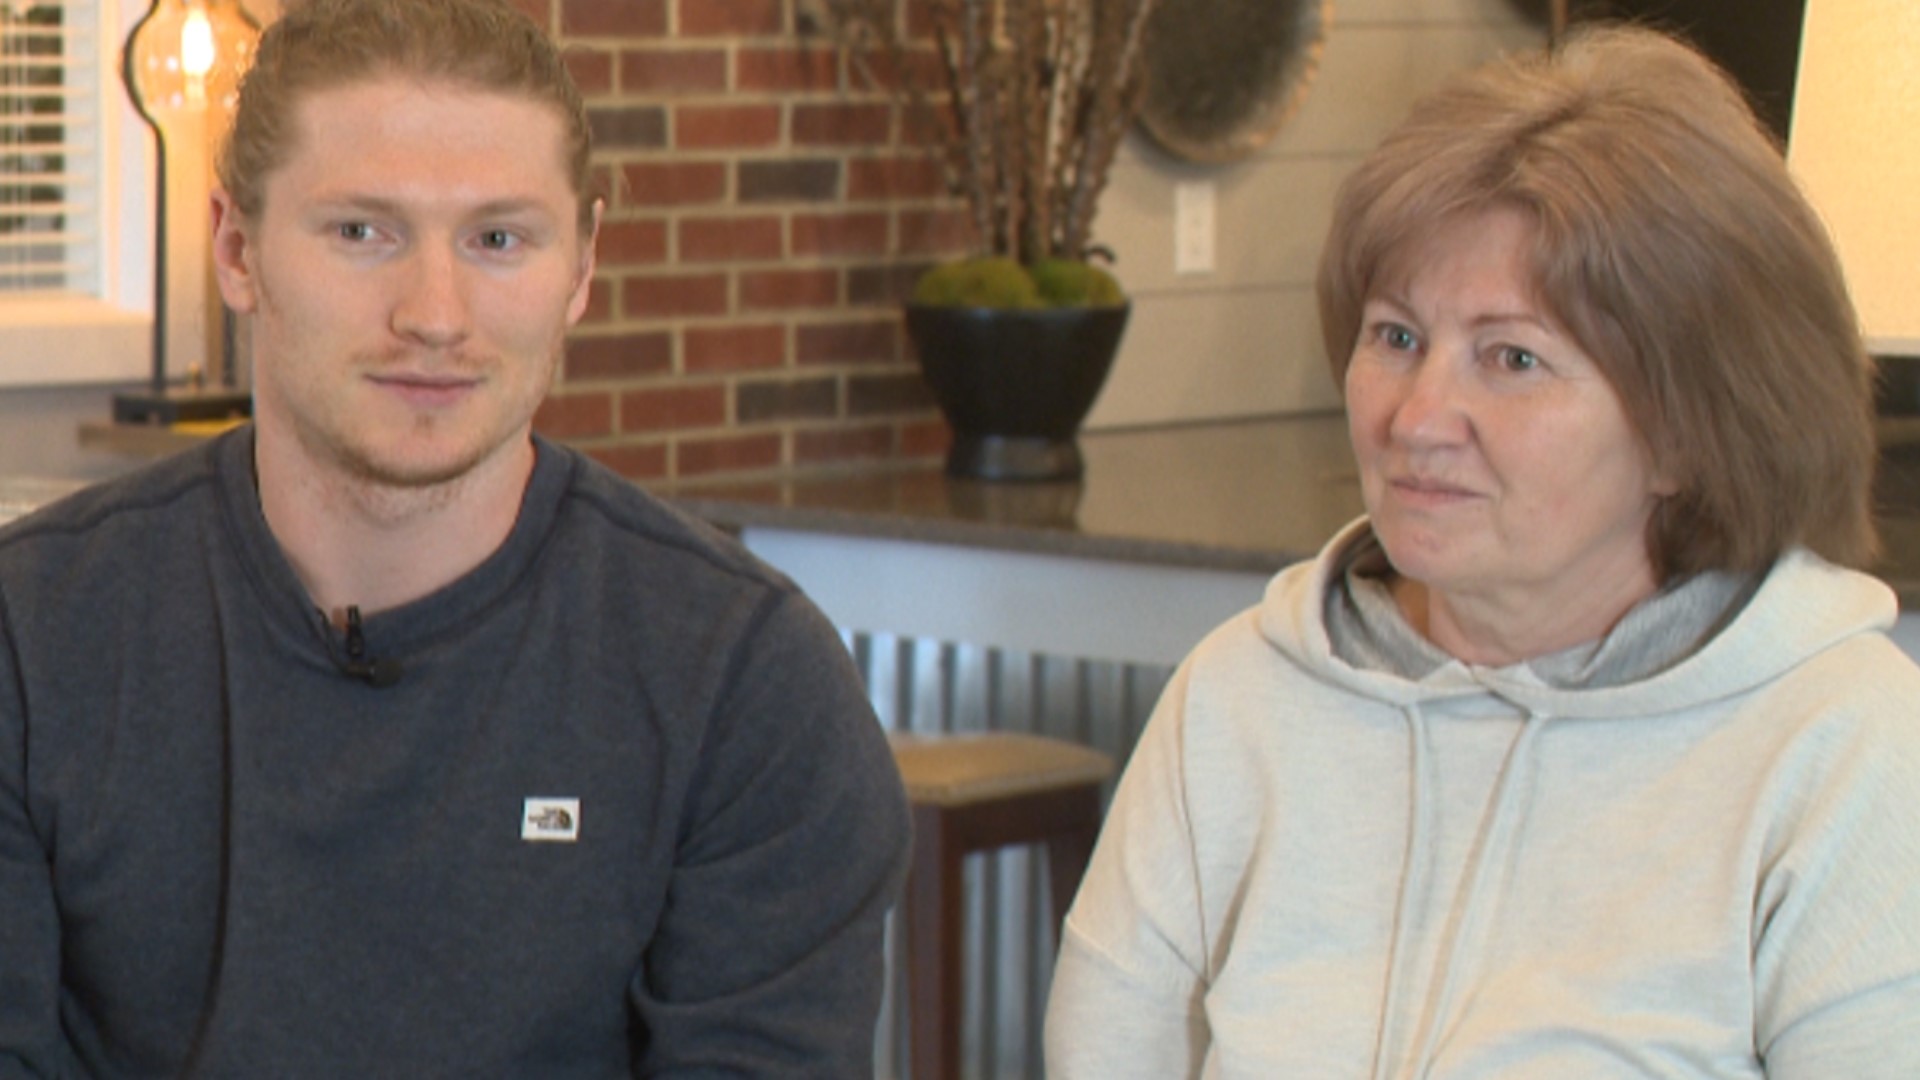 A man in Fort Mill is thankful his mother is safe and living with him after she escaped her war-torn country, landing in the Carolinas.